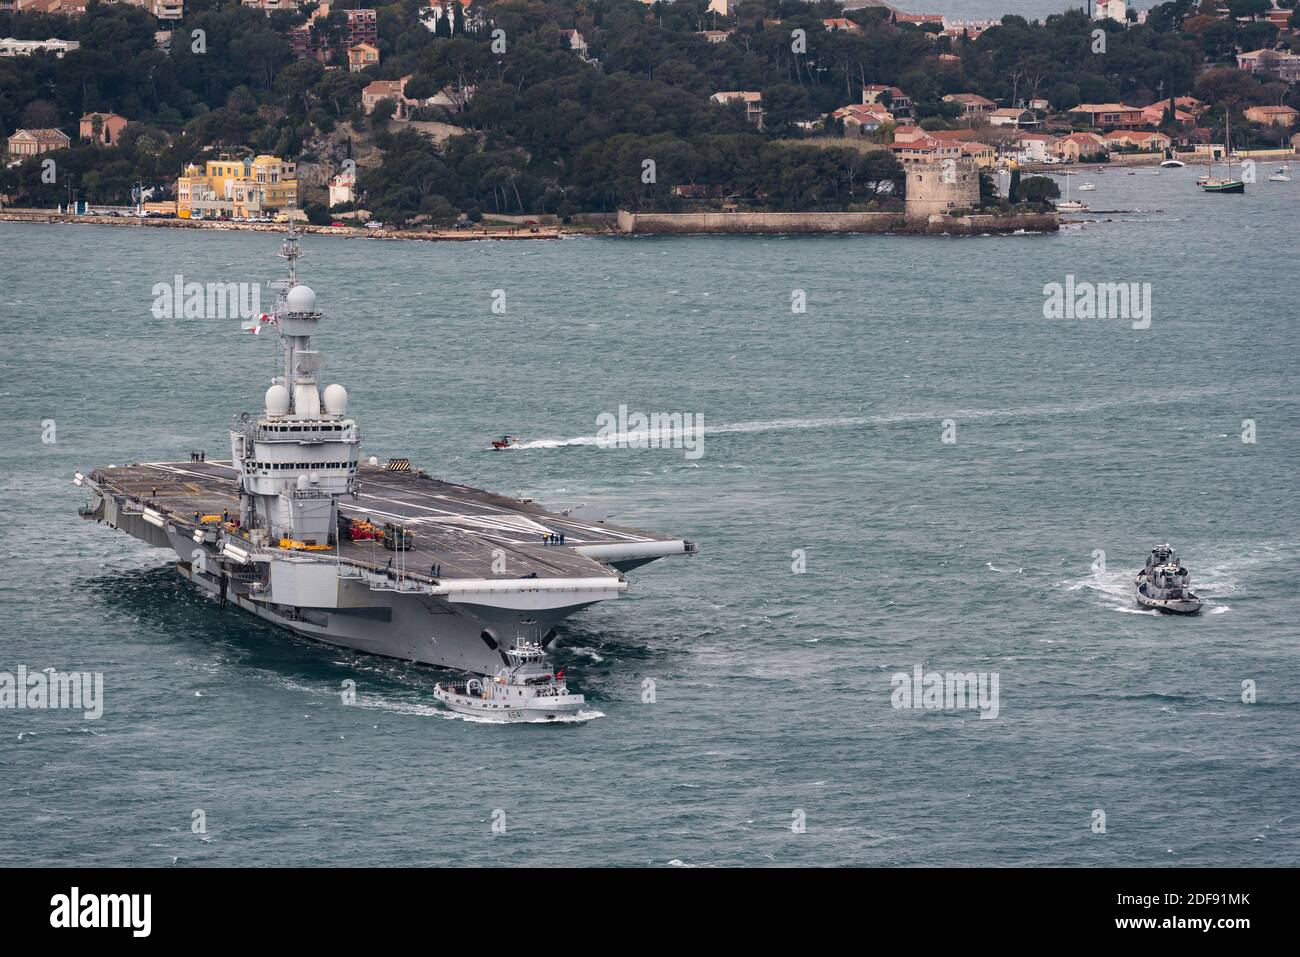 Hand out file photo dated January 21, 2020 of French nuclear aircraft carrier sets sail from Toulon naval base for a several months mission to the eastern Mediterranean to fight terrorism. France’s flagship military aircraft carrier the Charles de Gaulle is on its way back to port after some staff on board showed signs of Covid-19 symptoms, said the French armed forces ministry on Wednesday. The ministry said around 40 staff were under strict medical observation at present. The disclosure comes after a coronavirus outbreak hit the US aircraft carrier Theodore Roosevelt, now at port in Guam. Ph Stock Photo